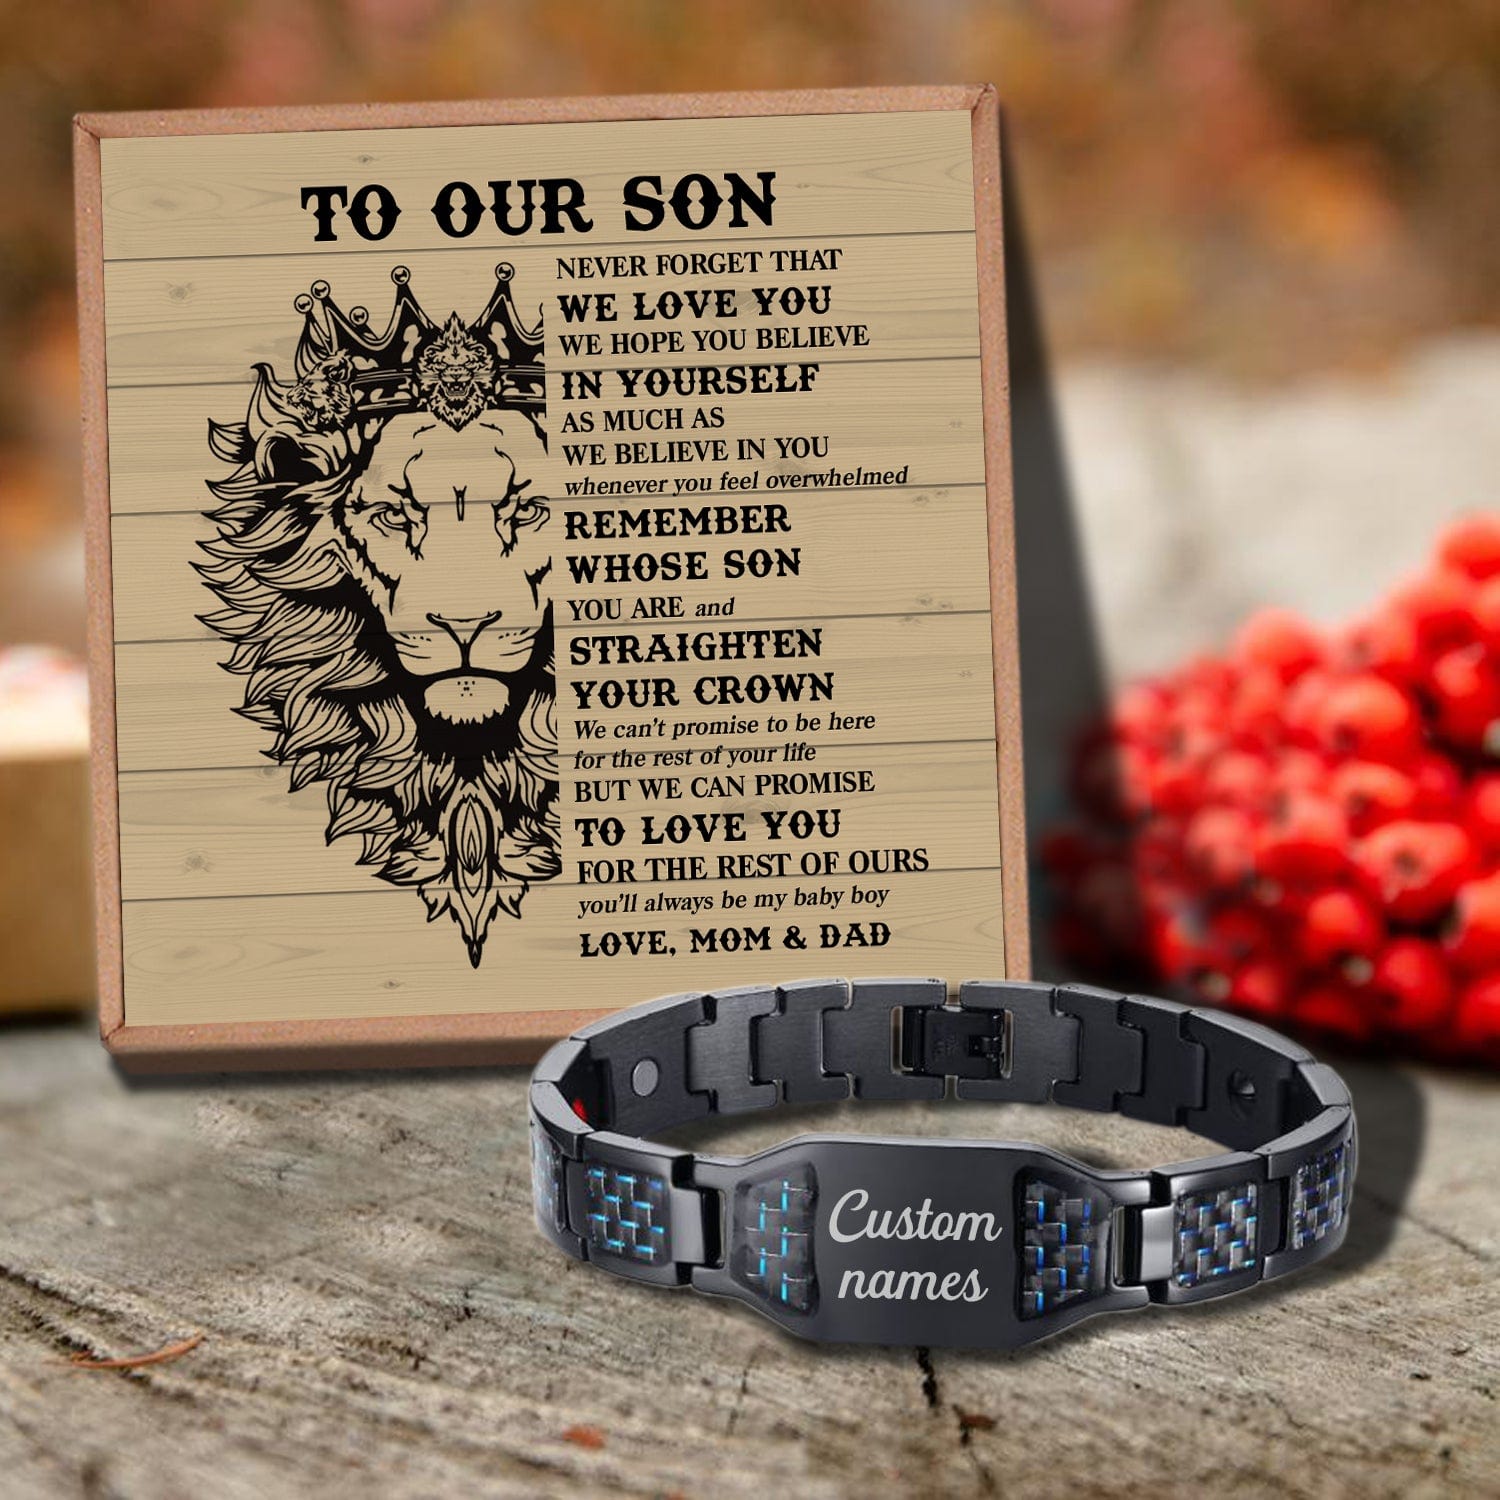 Bracelets For Son To Our Son - Believe In Yourself Customized Bracelet For Men GiveMe-Gifts